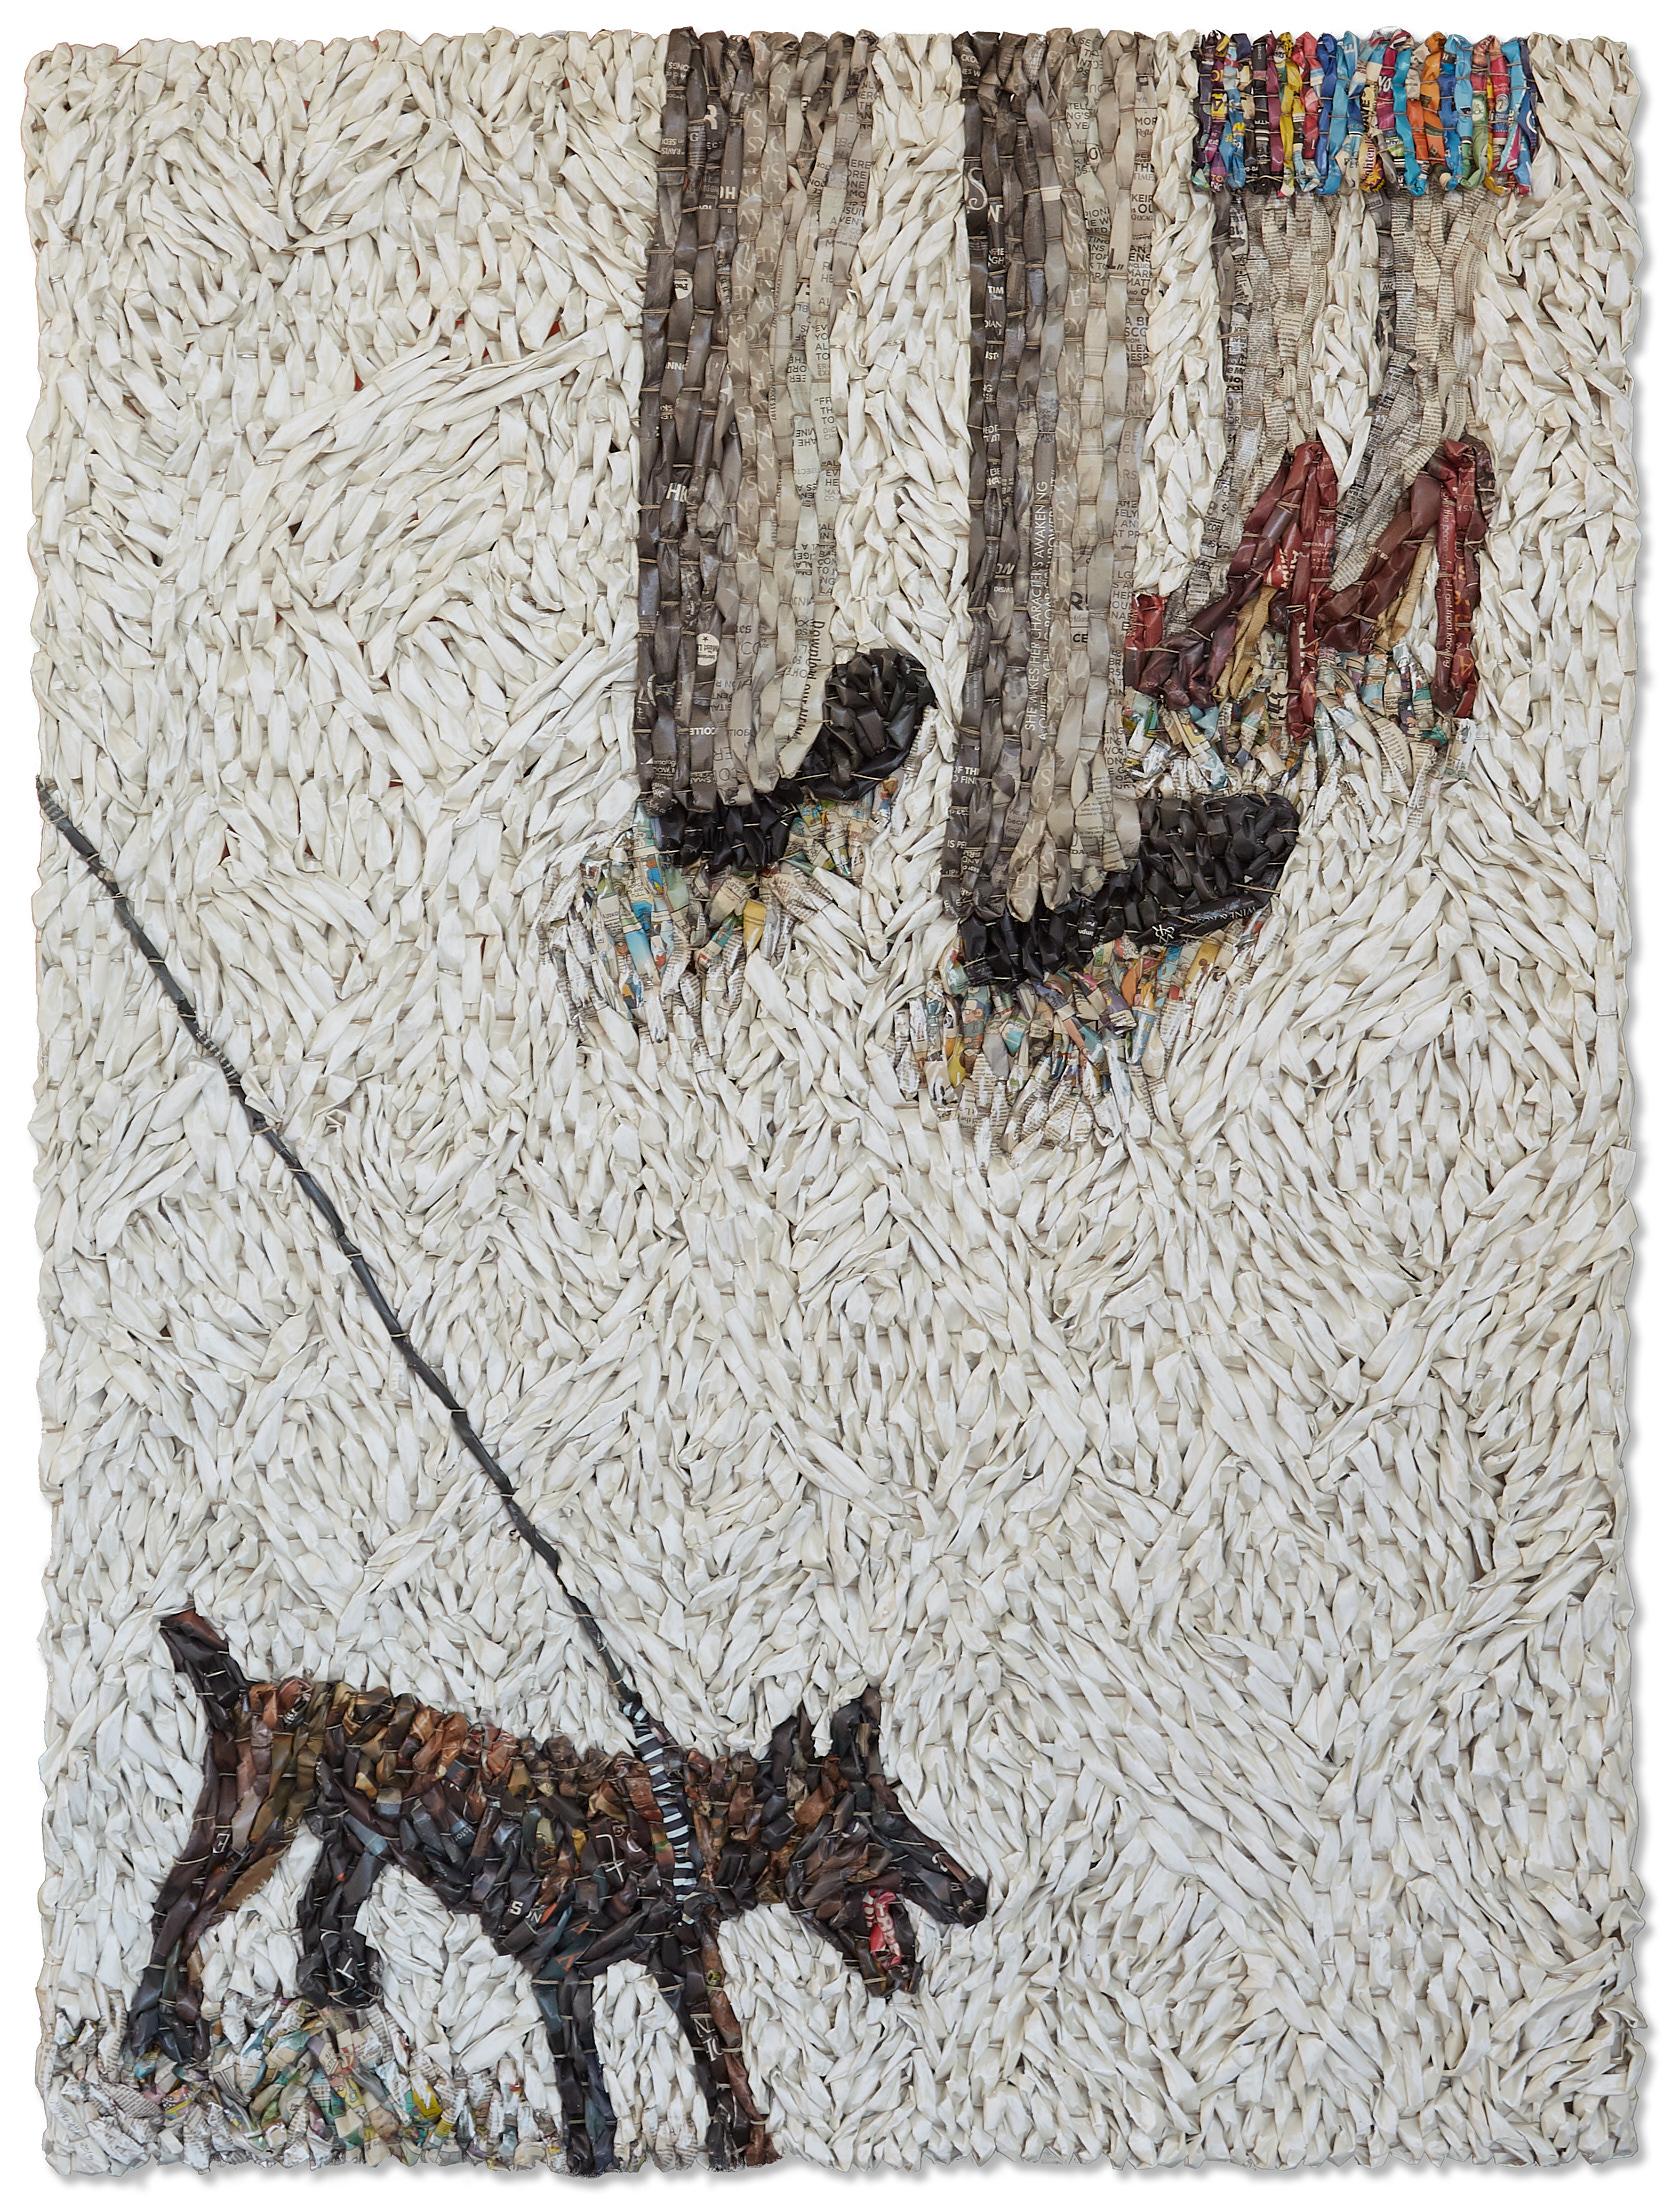 Dog on Leash with Two People - Art by Gugger Petter